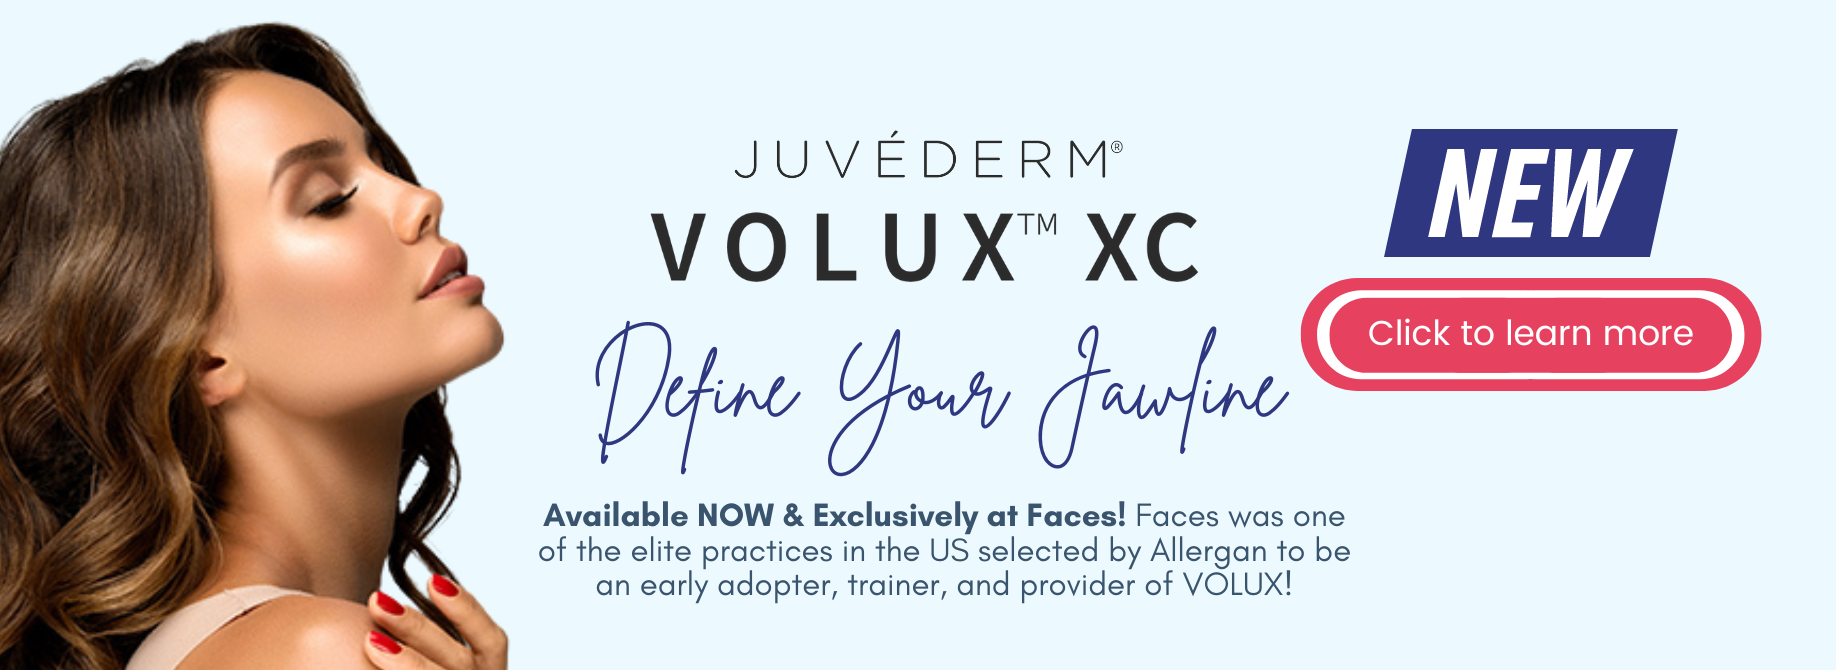 Faces of South Tampa Juvederm Volux